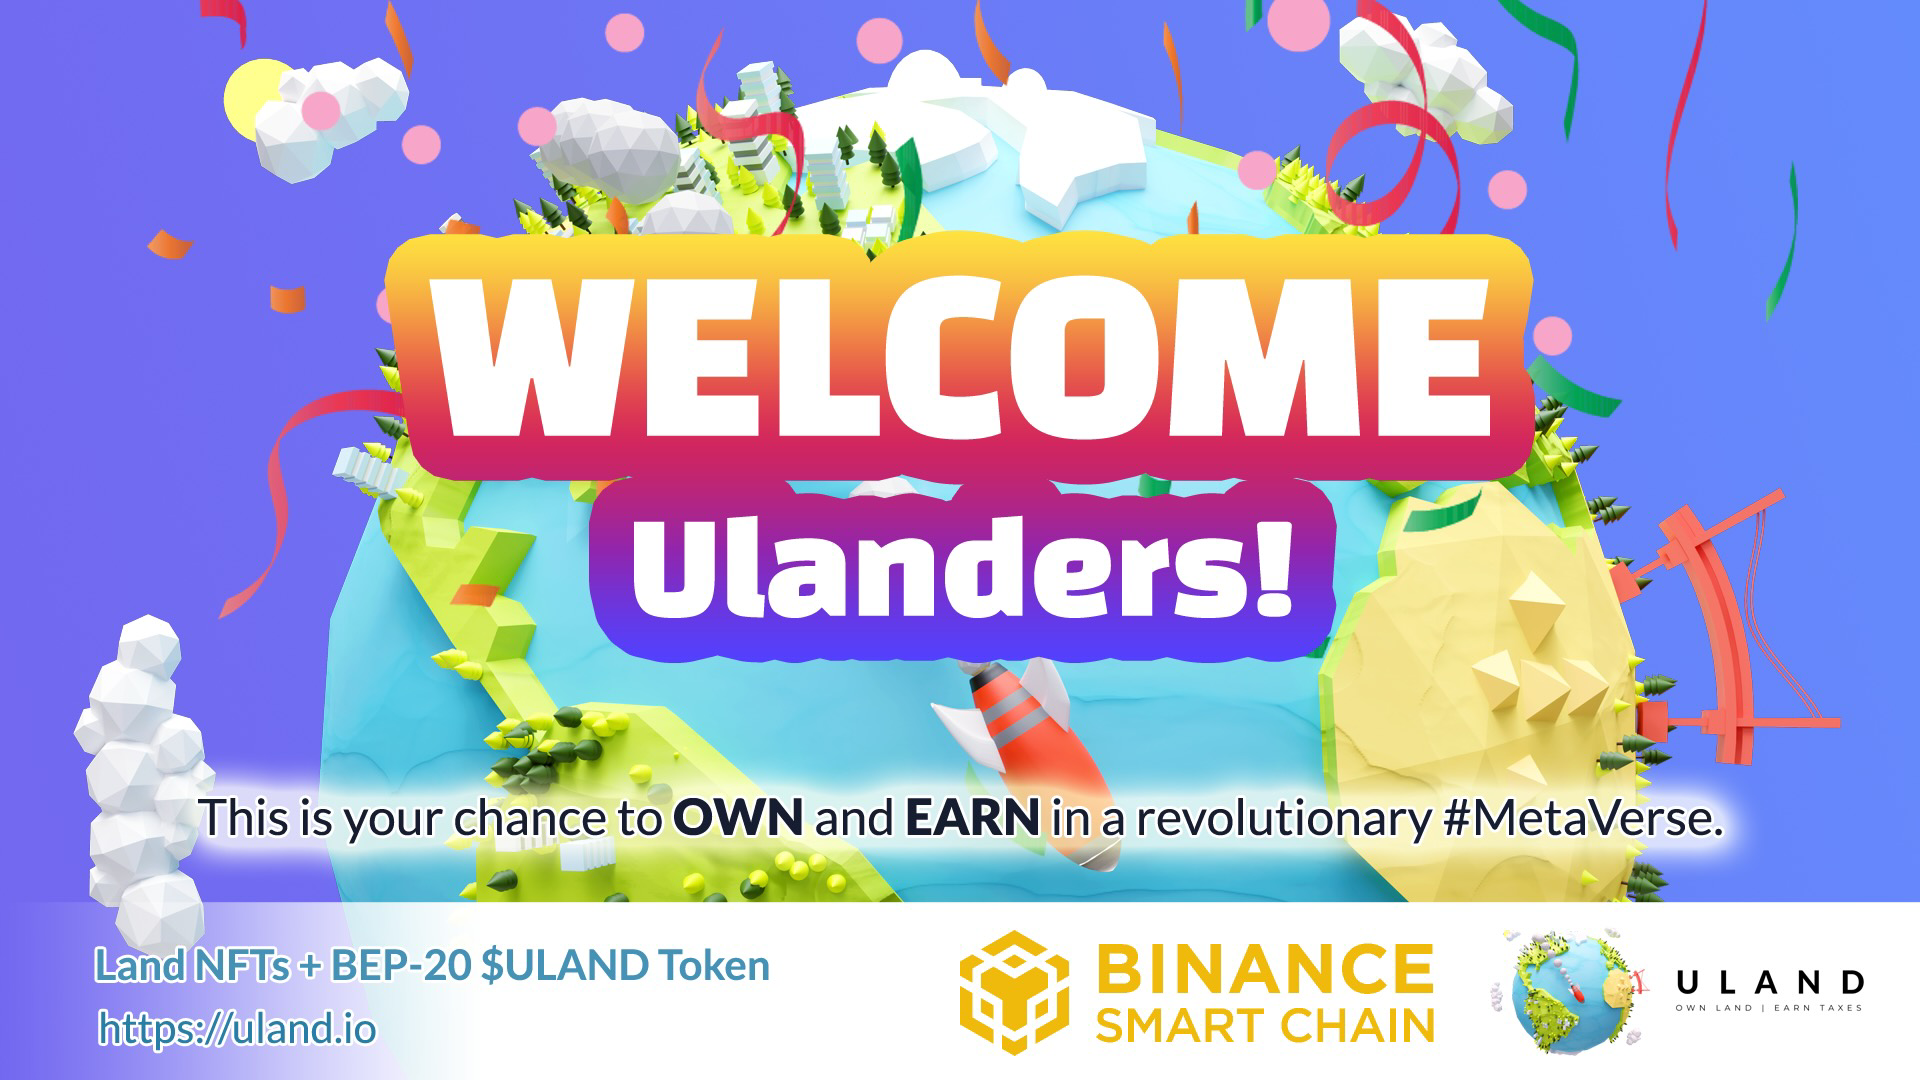 ULAND Is Gaining Considerable Attention, Here’s Why